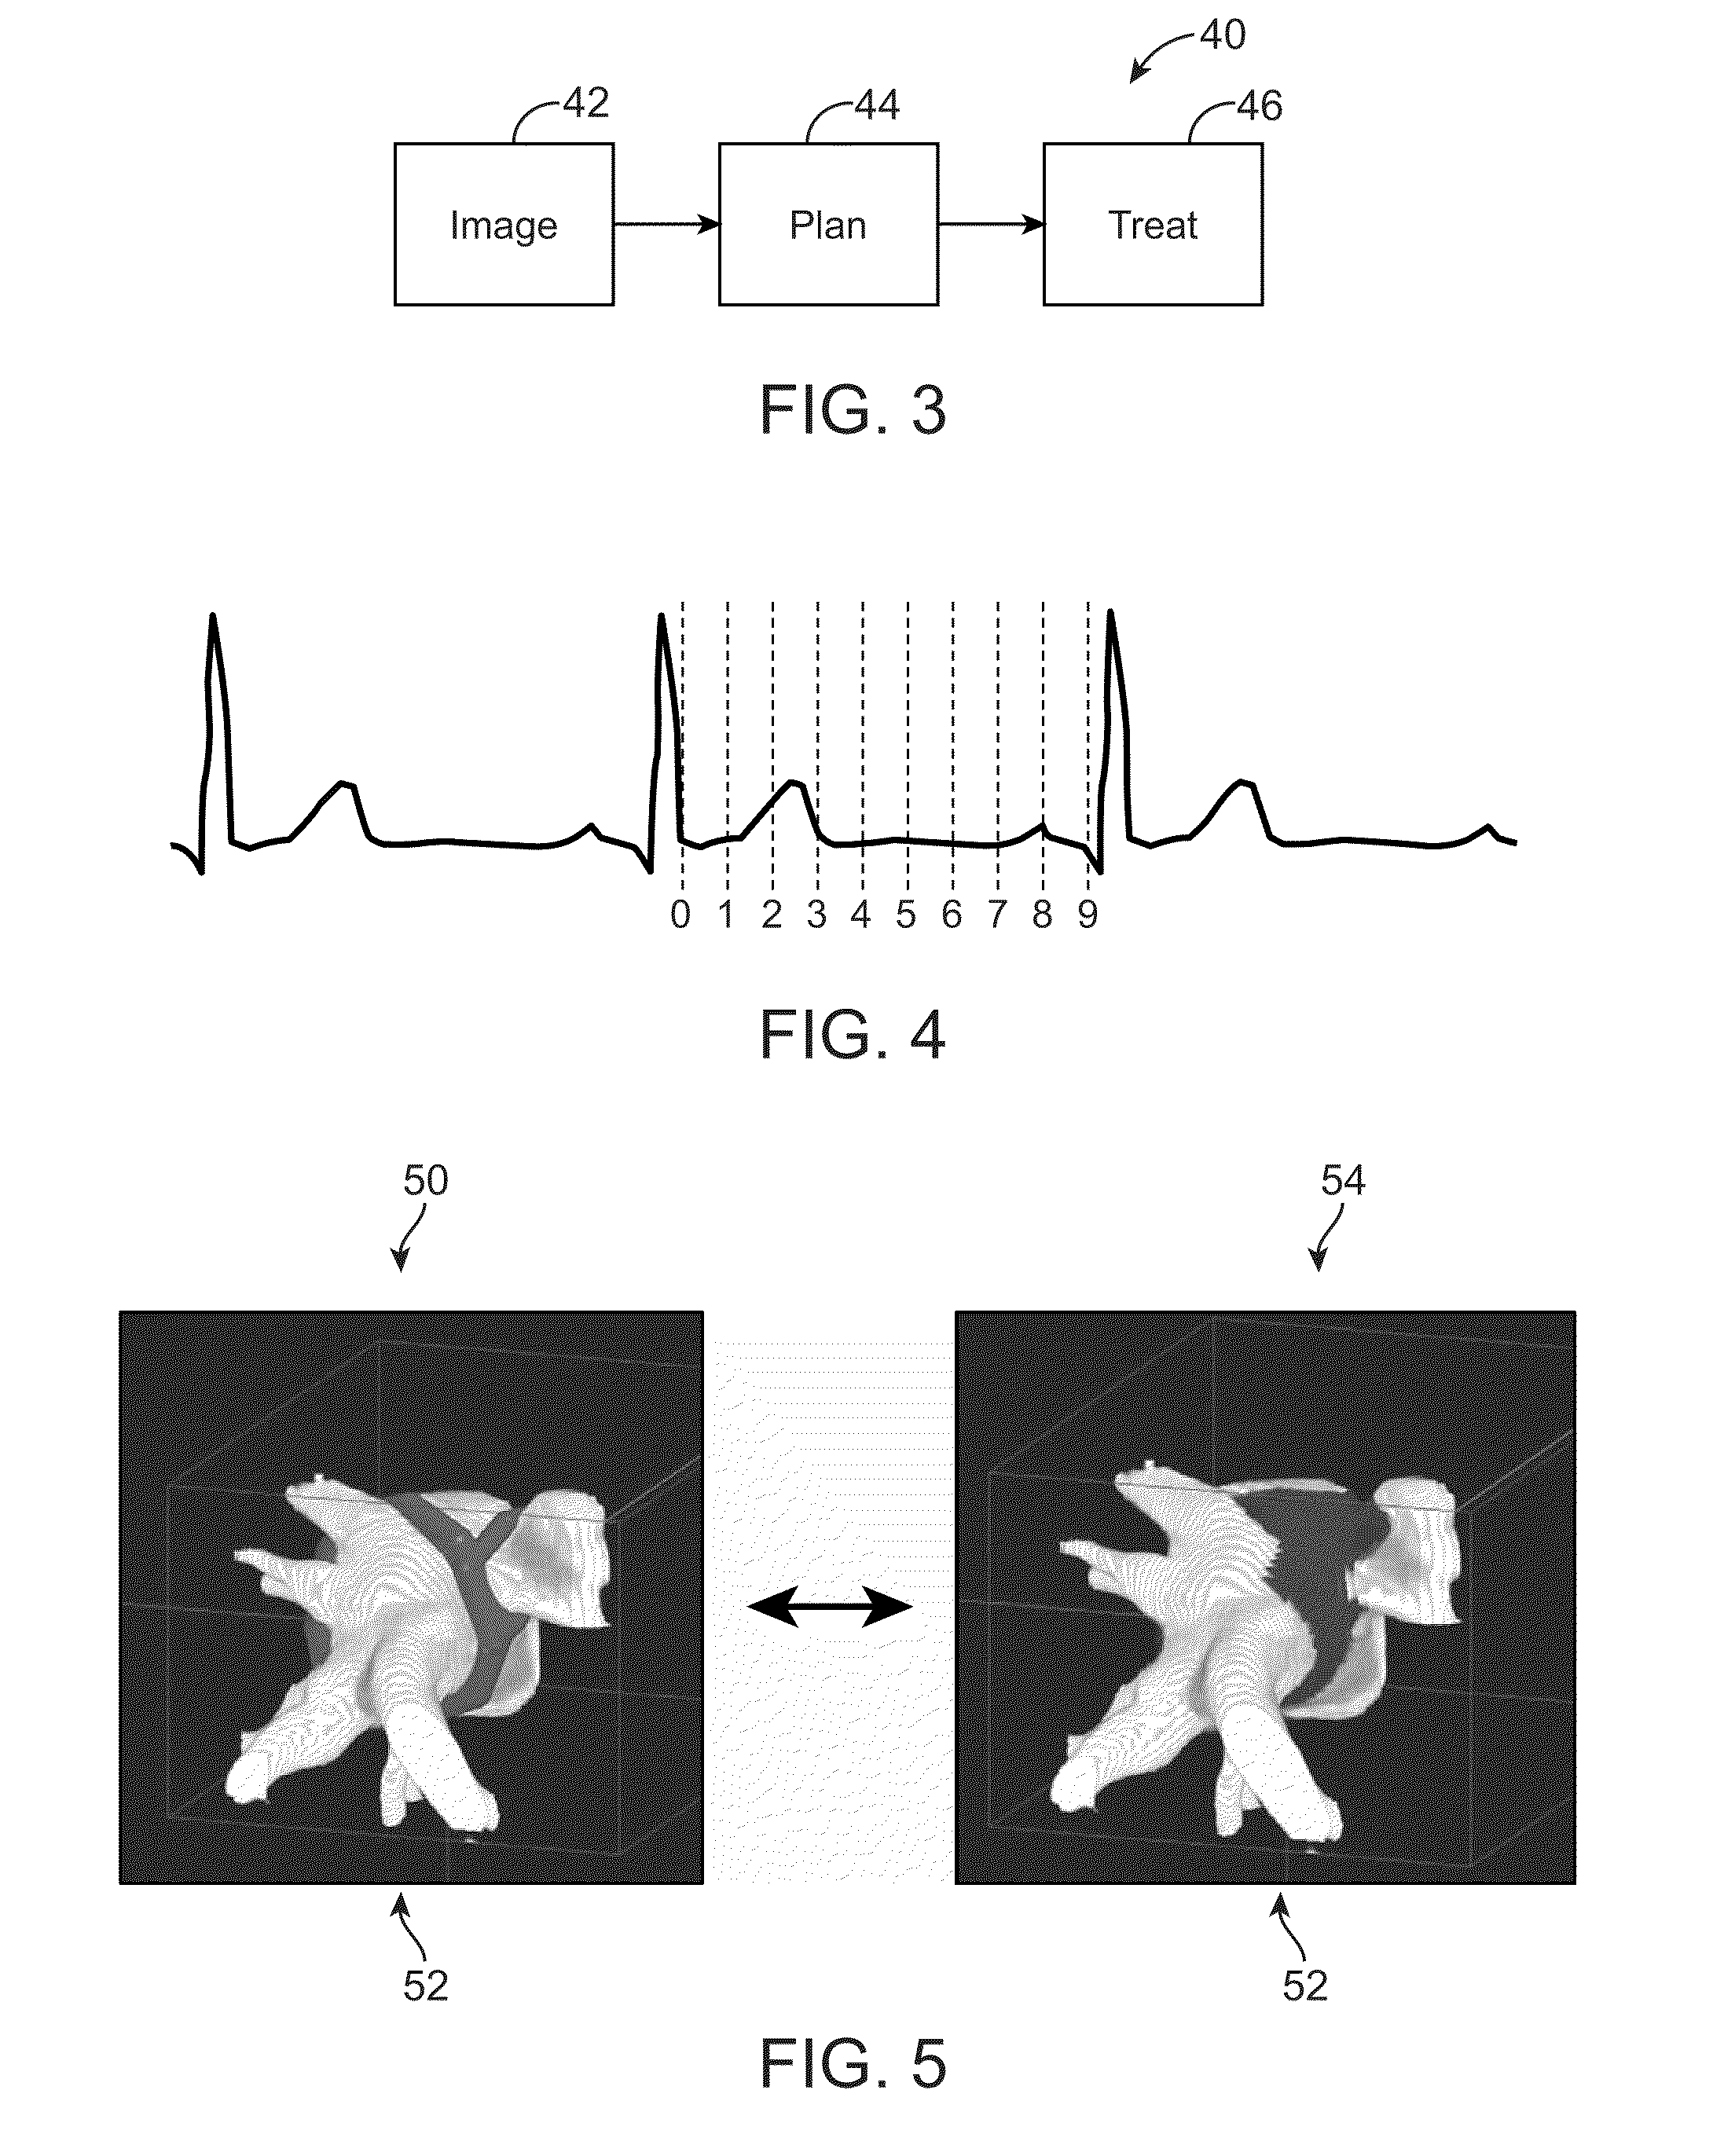 Heart Treatment Kit, System, and Method For Radiosurgically Alleviating Arrhythmia